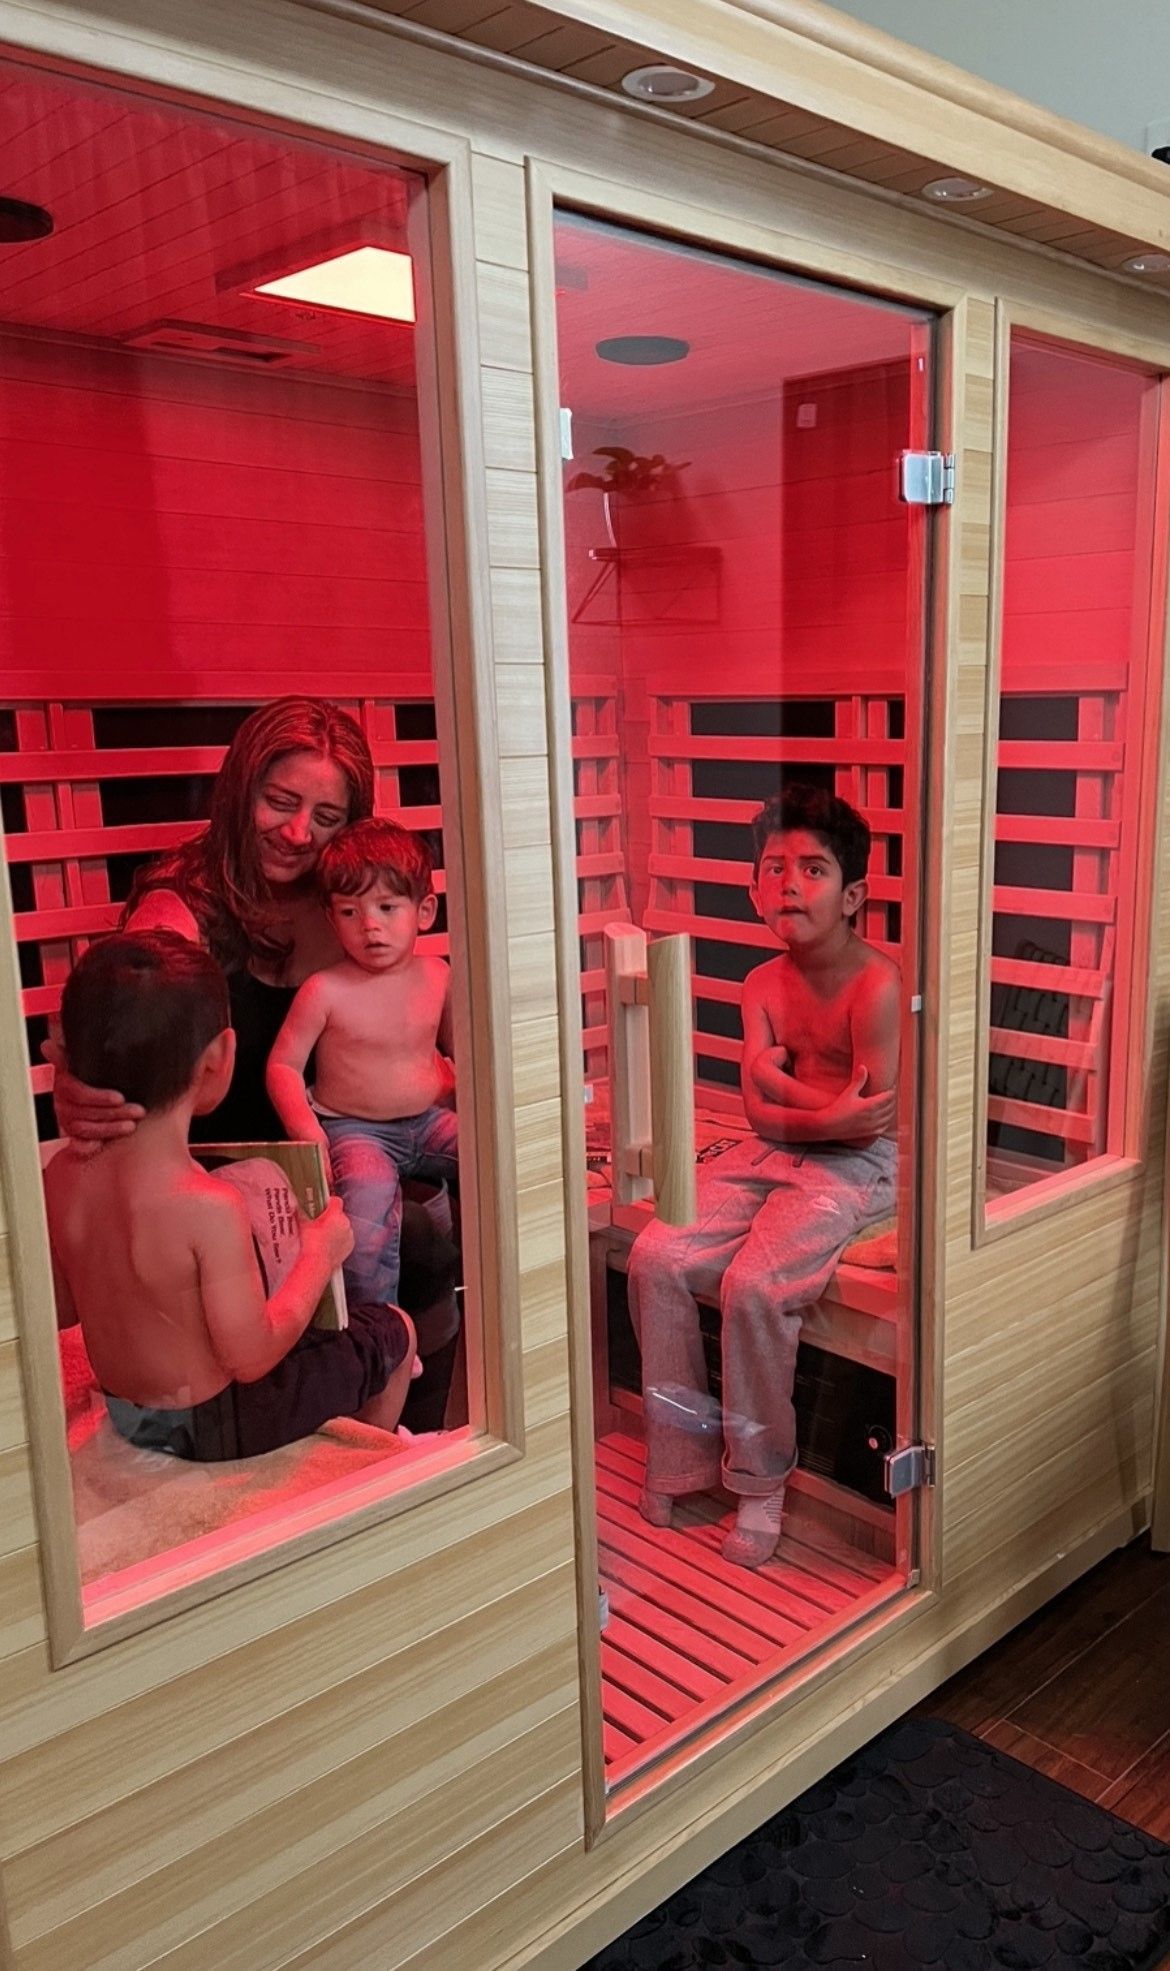 A family is sitting in an infrared sauna.